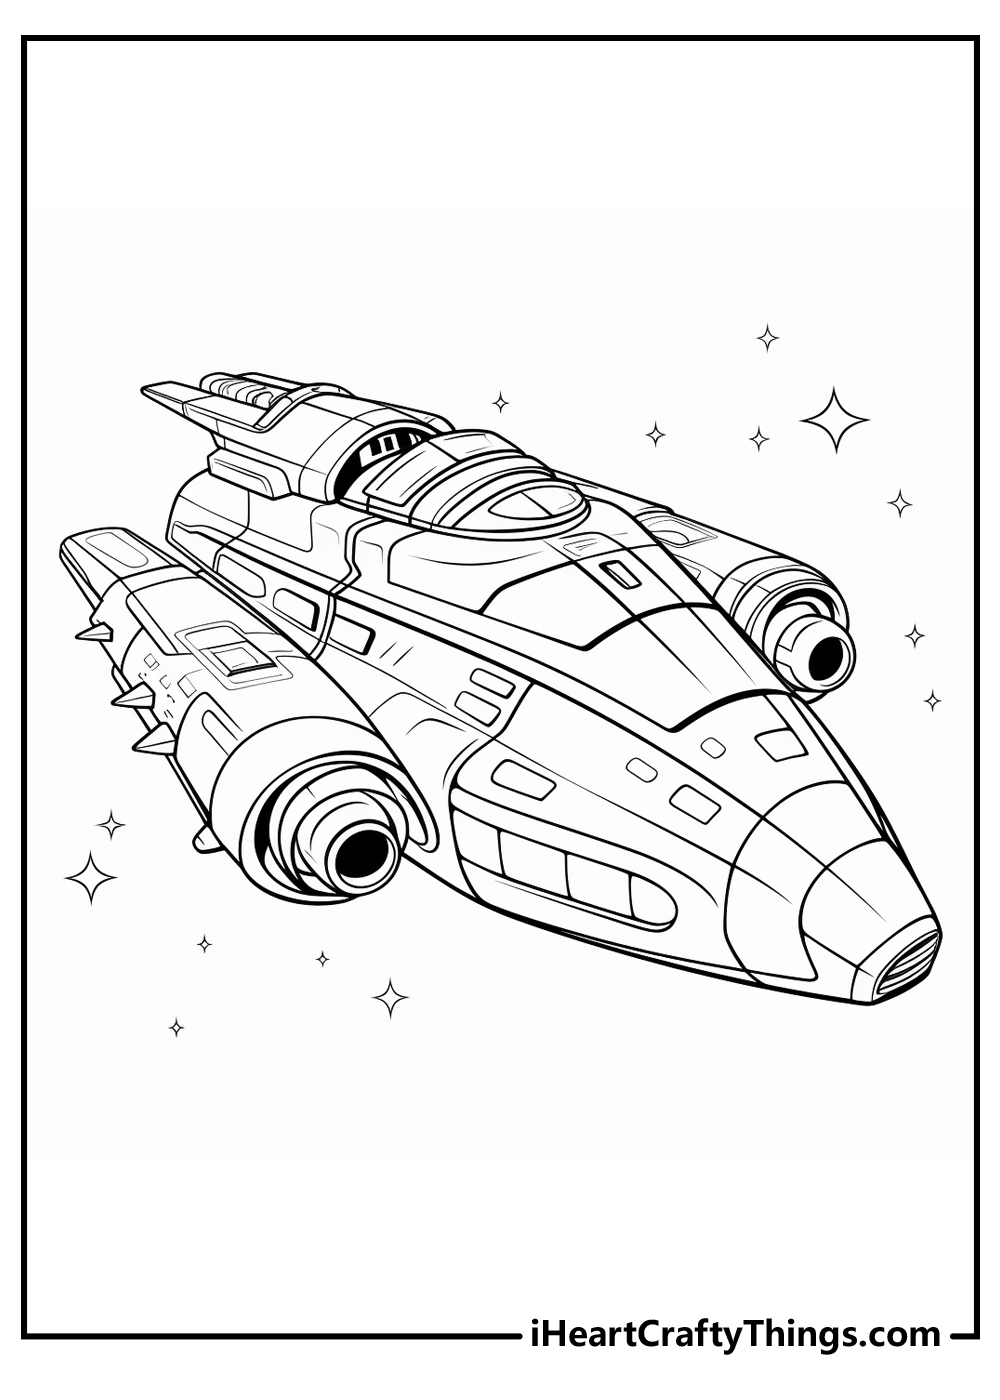 Spaceship coloring pages free printables